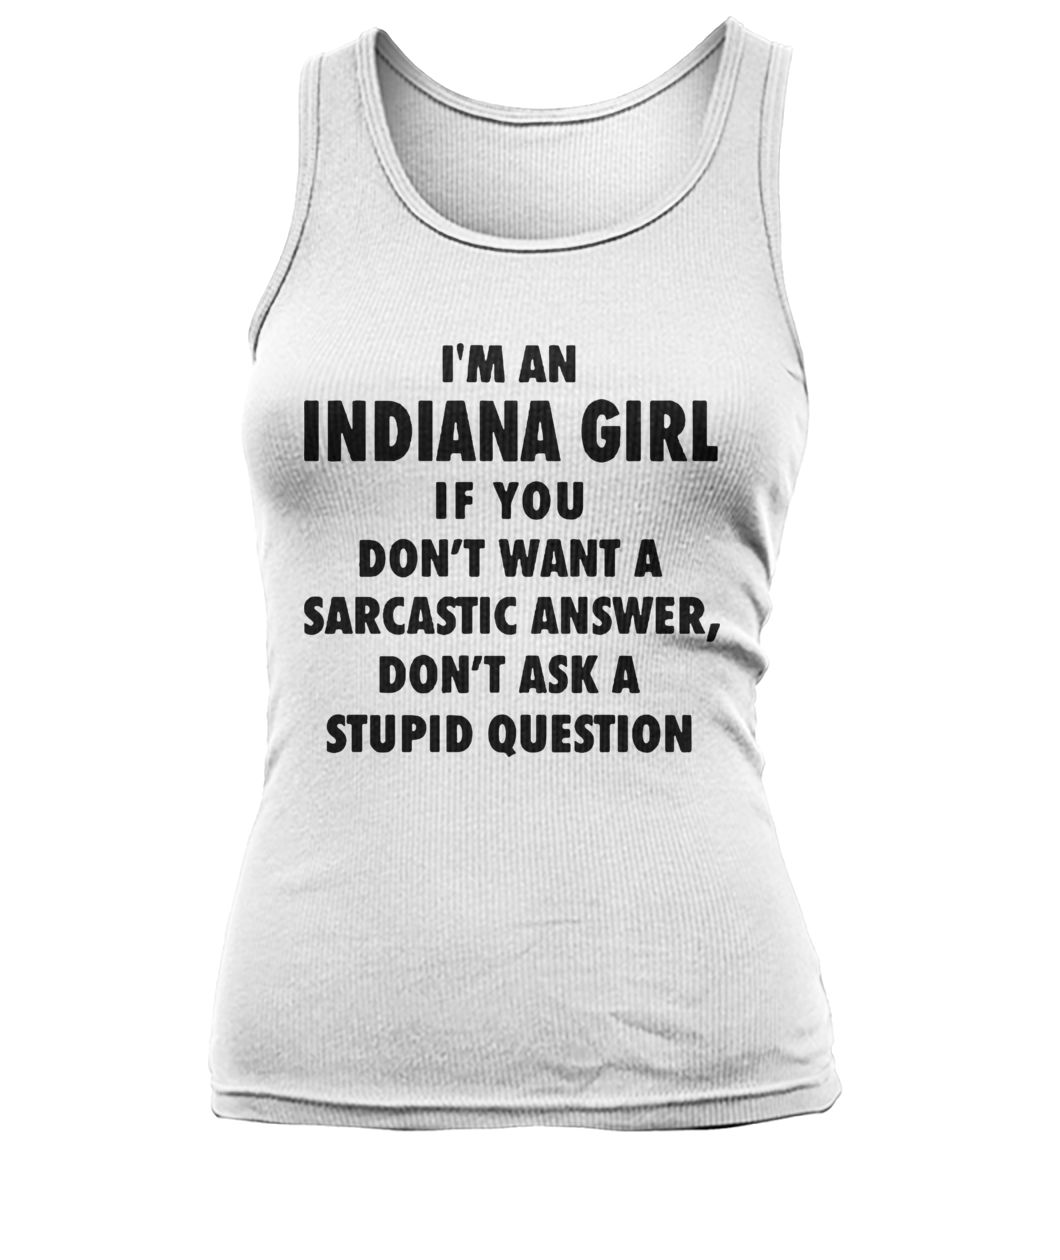 I'm an Indiana girl if you don't want a sarcastic answer don't ask a stupid question women's tank top